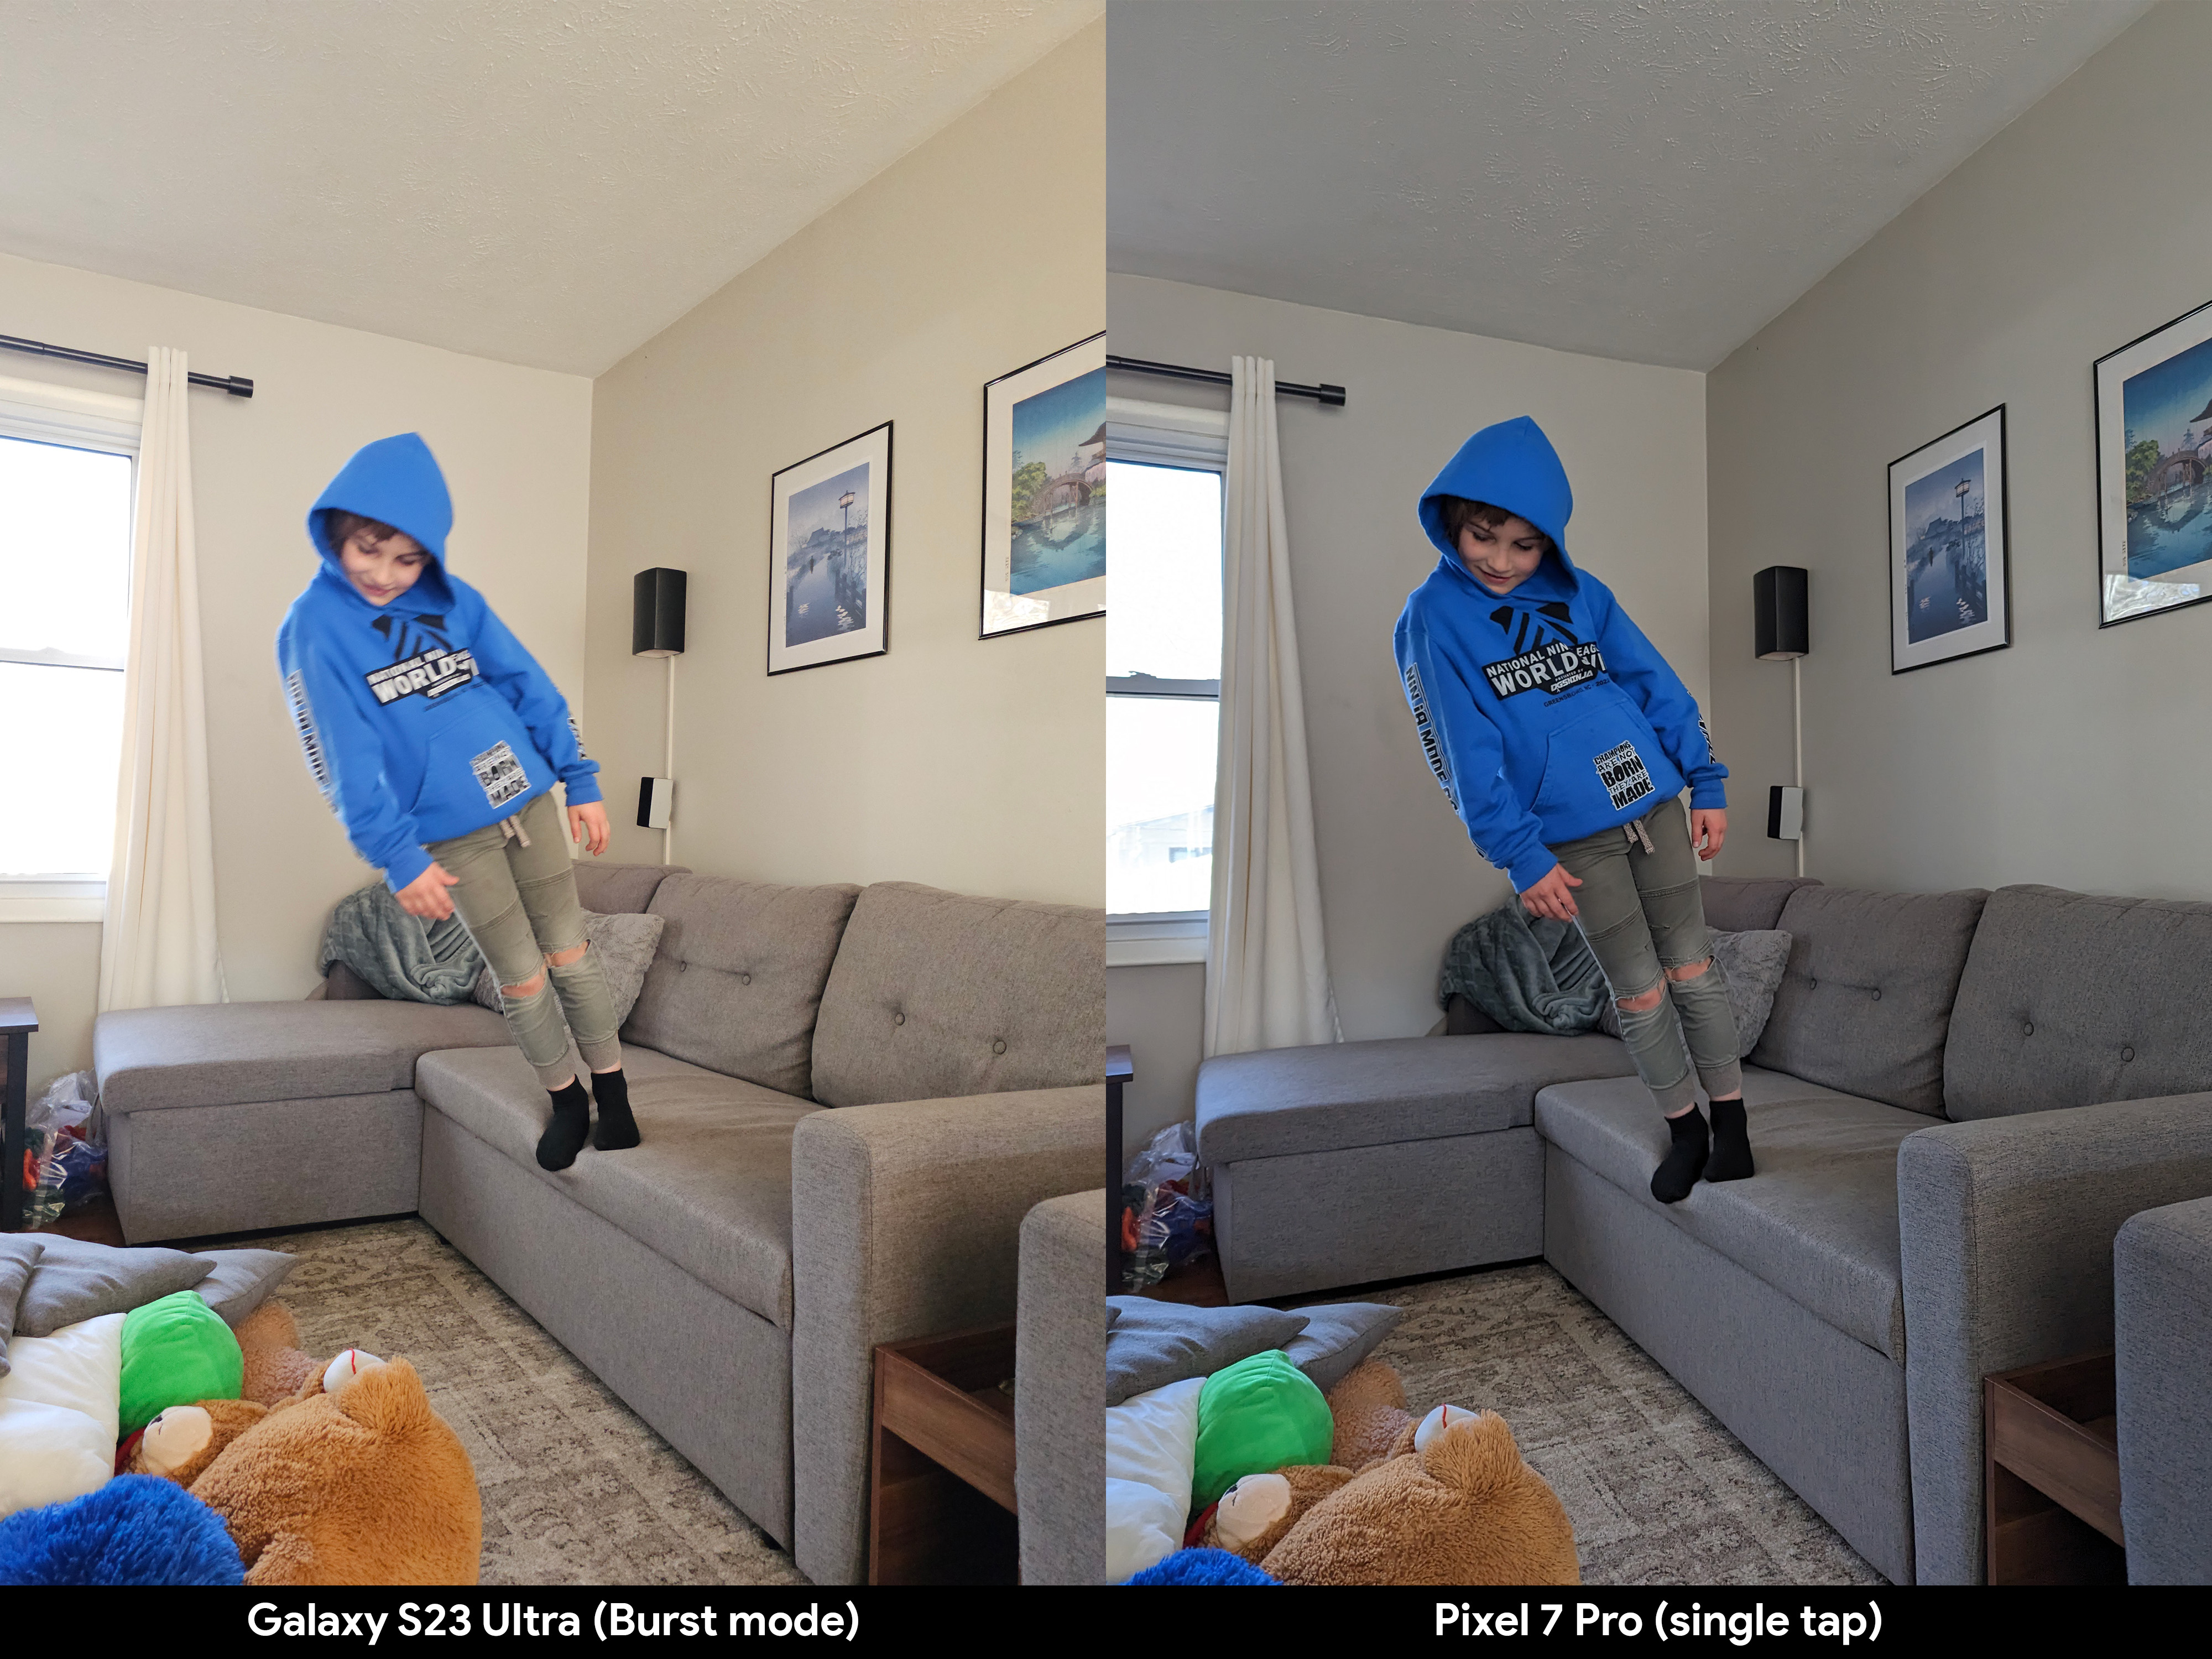 Using Burst Mode on the Galaxy S23 Ultra and comparing it to a single shot on the Pixel 7 Pro